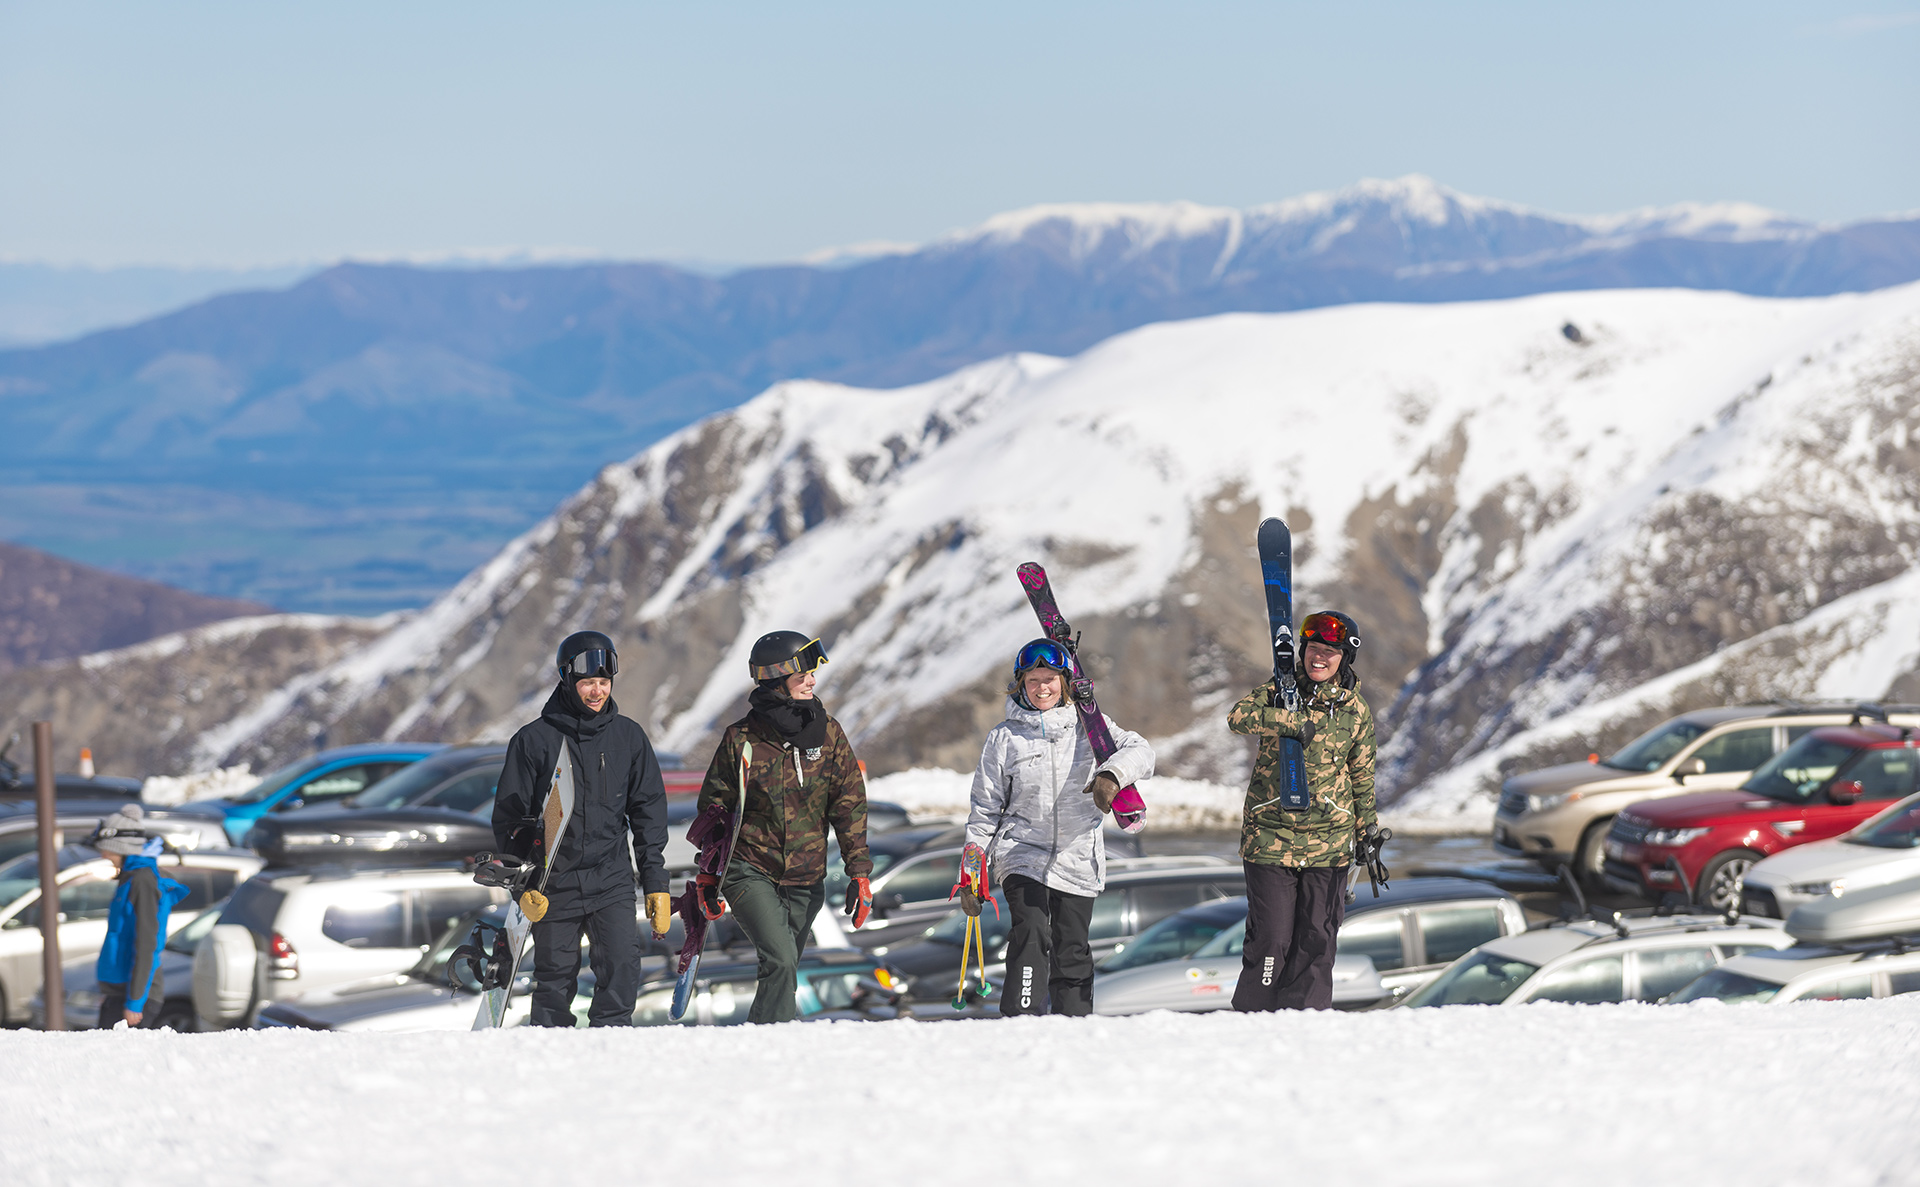 Friends arriving at Mt Hutt ski area with car park in the background